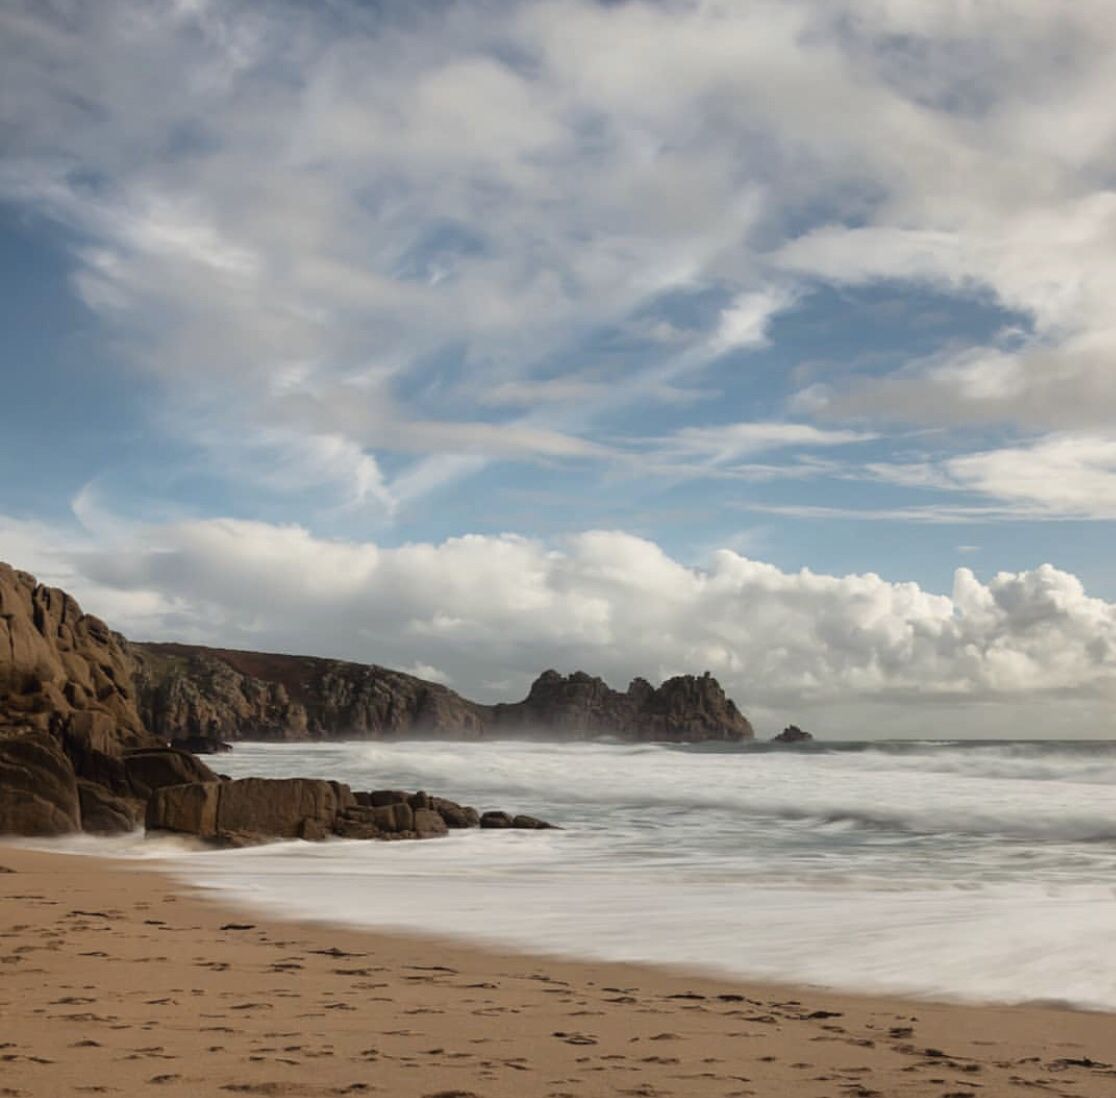 Yet another stunning day at Porthcurno! Here’s the beach being shown off by the amazing photography skills of @Kernow_shots⠀🙌⠀ #GetMeToCornwall #Porthcurno #Cornwall